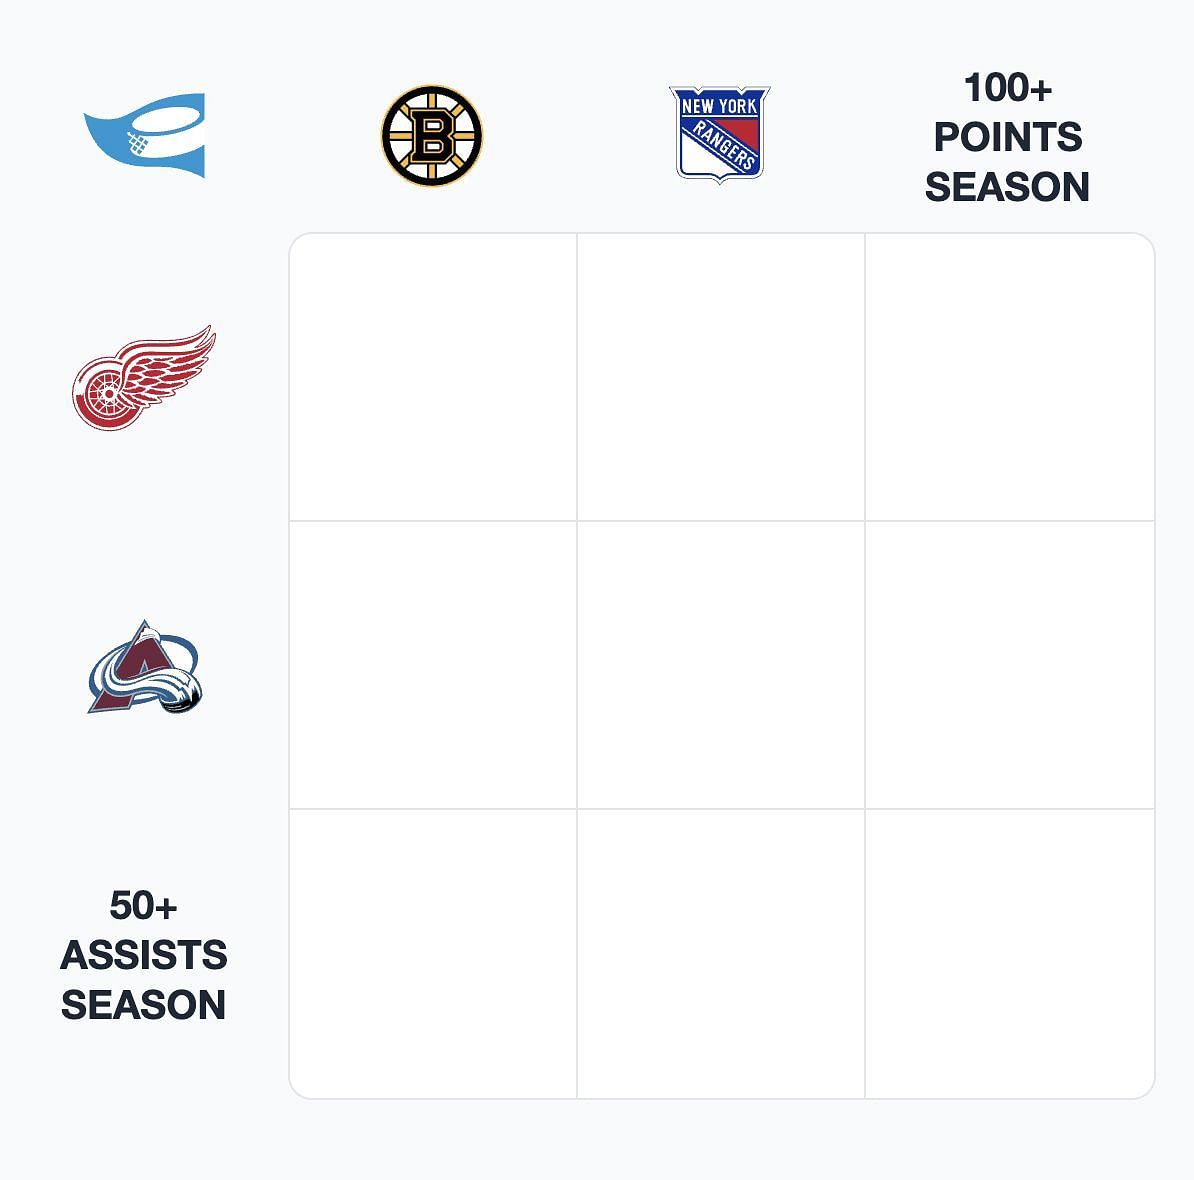 NHL Immaculate Grid answers for September 6